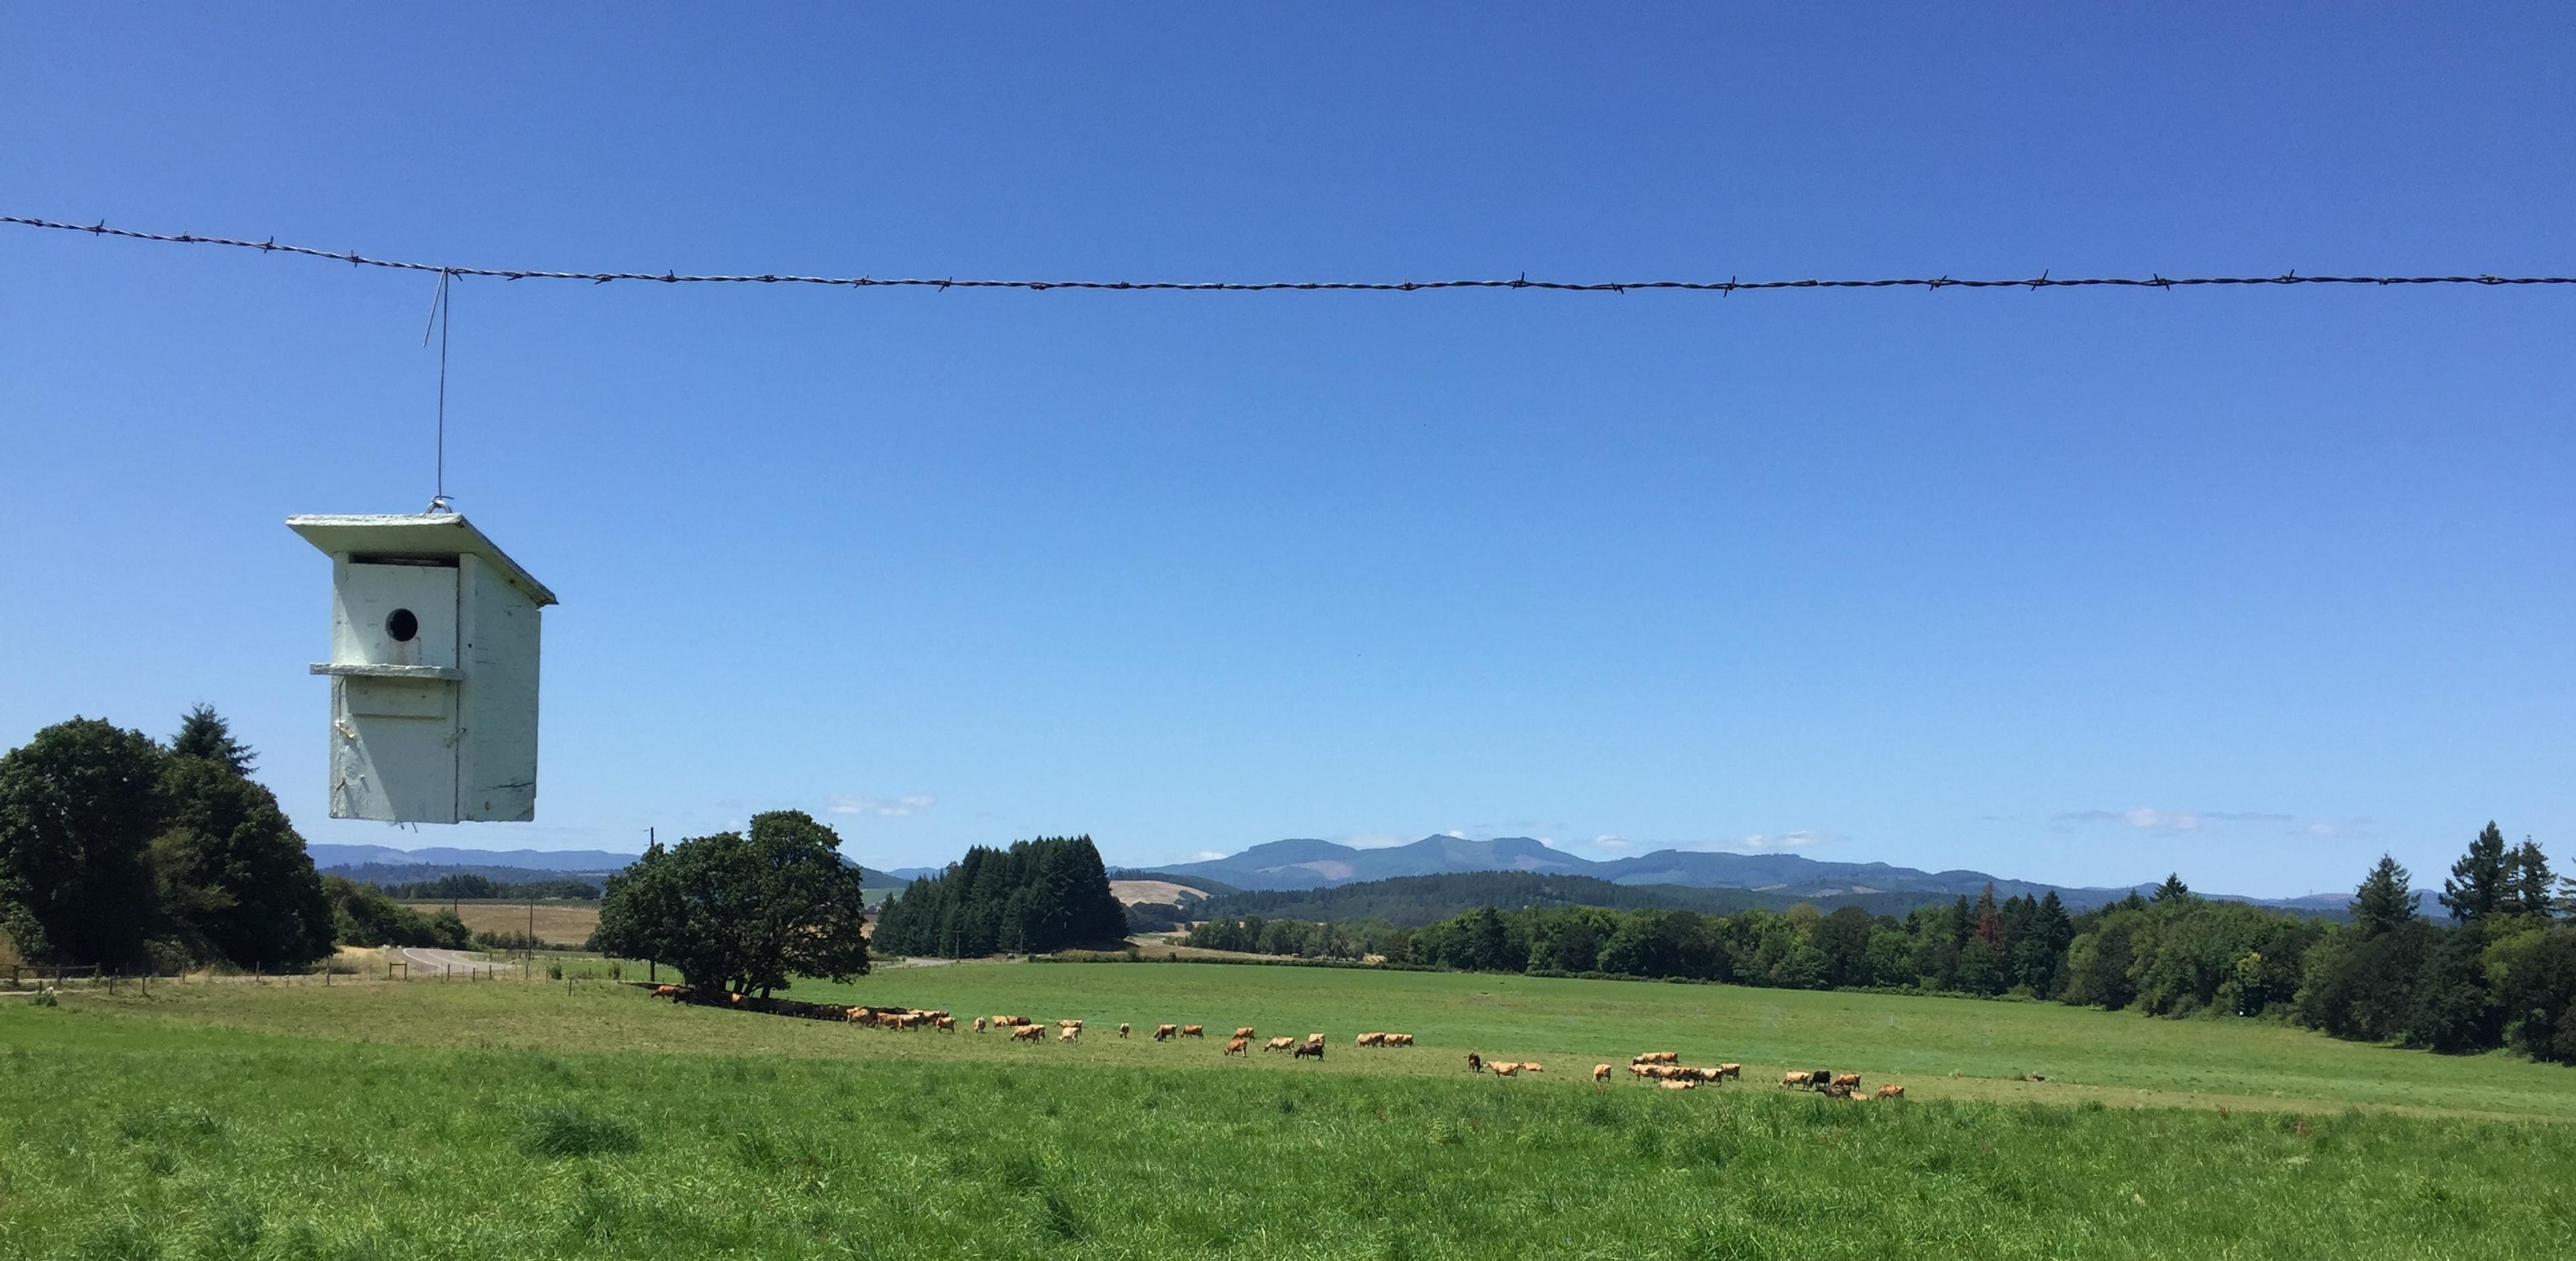 A bird house hangs on a barbed-wire fence as cows graze in the background on the Bansen organic farm.